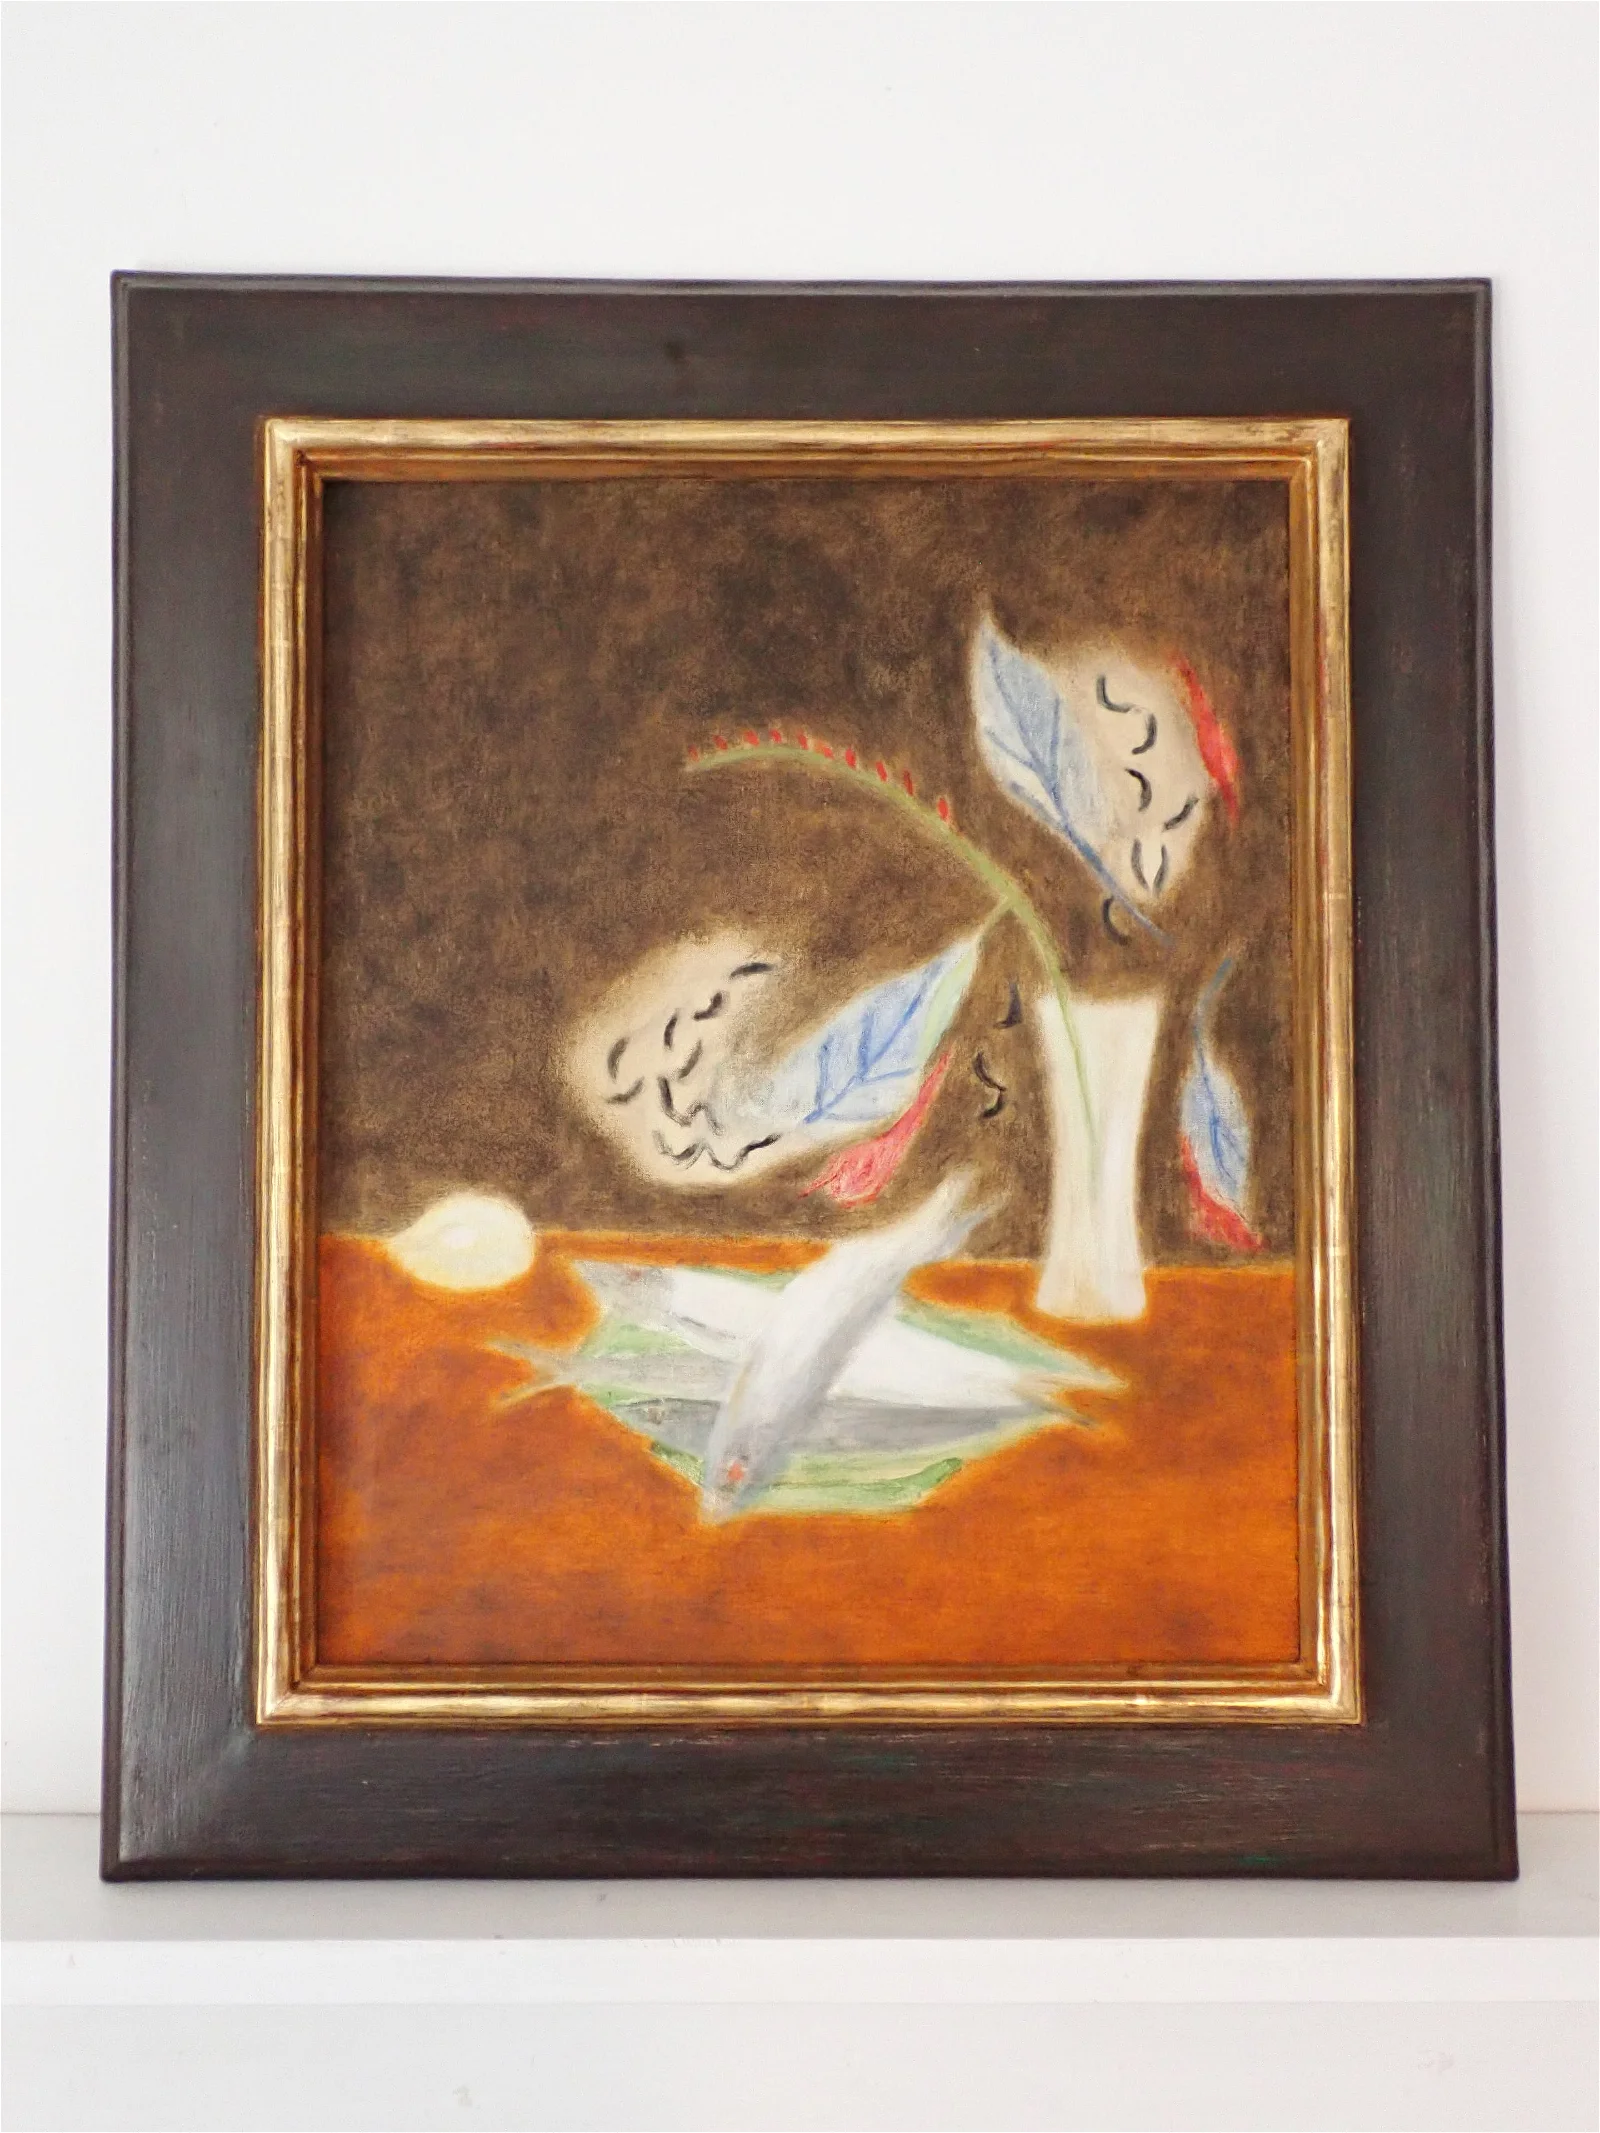 1967 Craigie Aitchinson-Fish Still Life Oil On Canvas - sold at auction for $14,500 from Boston estate